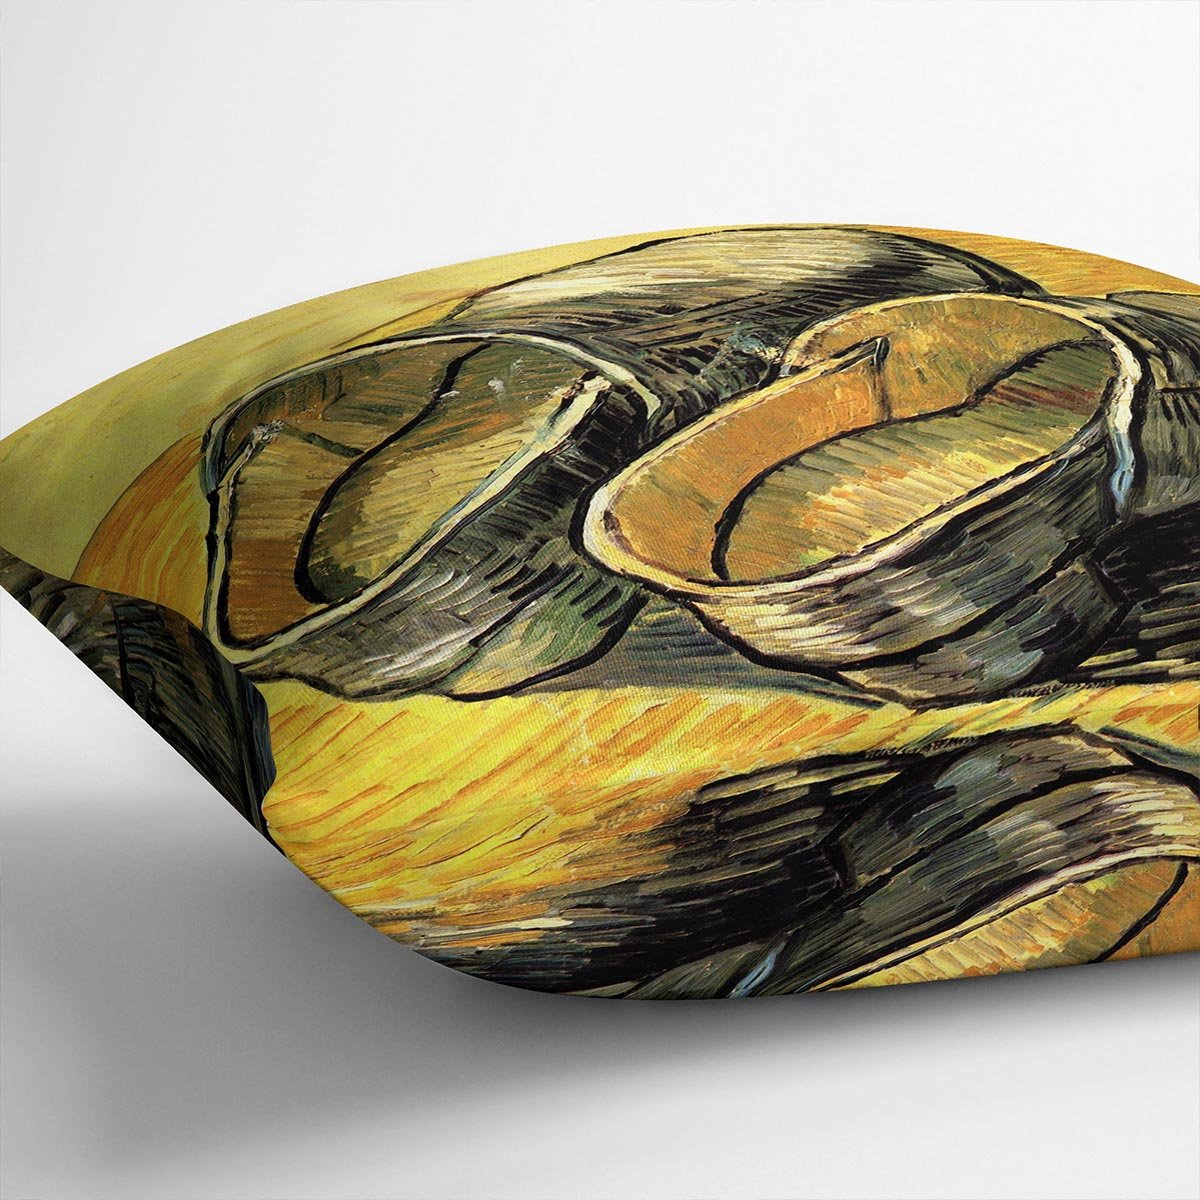 A Pair of Leather Clogs by Van Gogh Throw Pillow